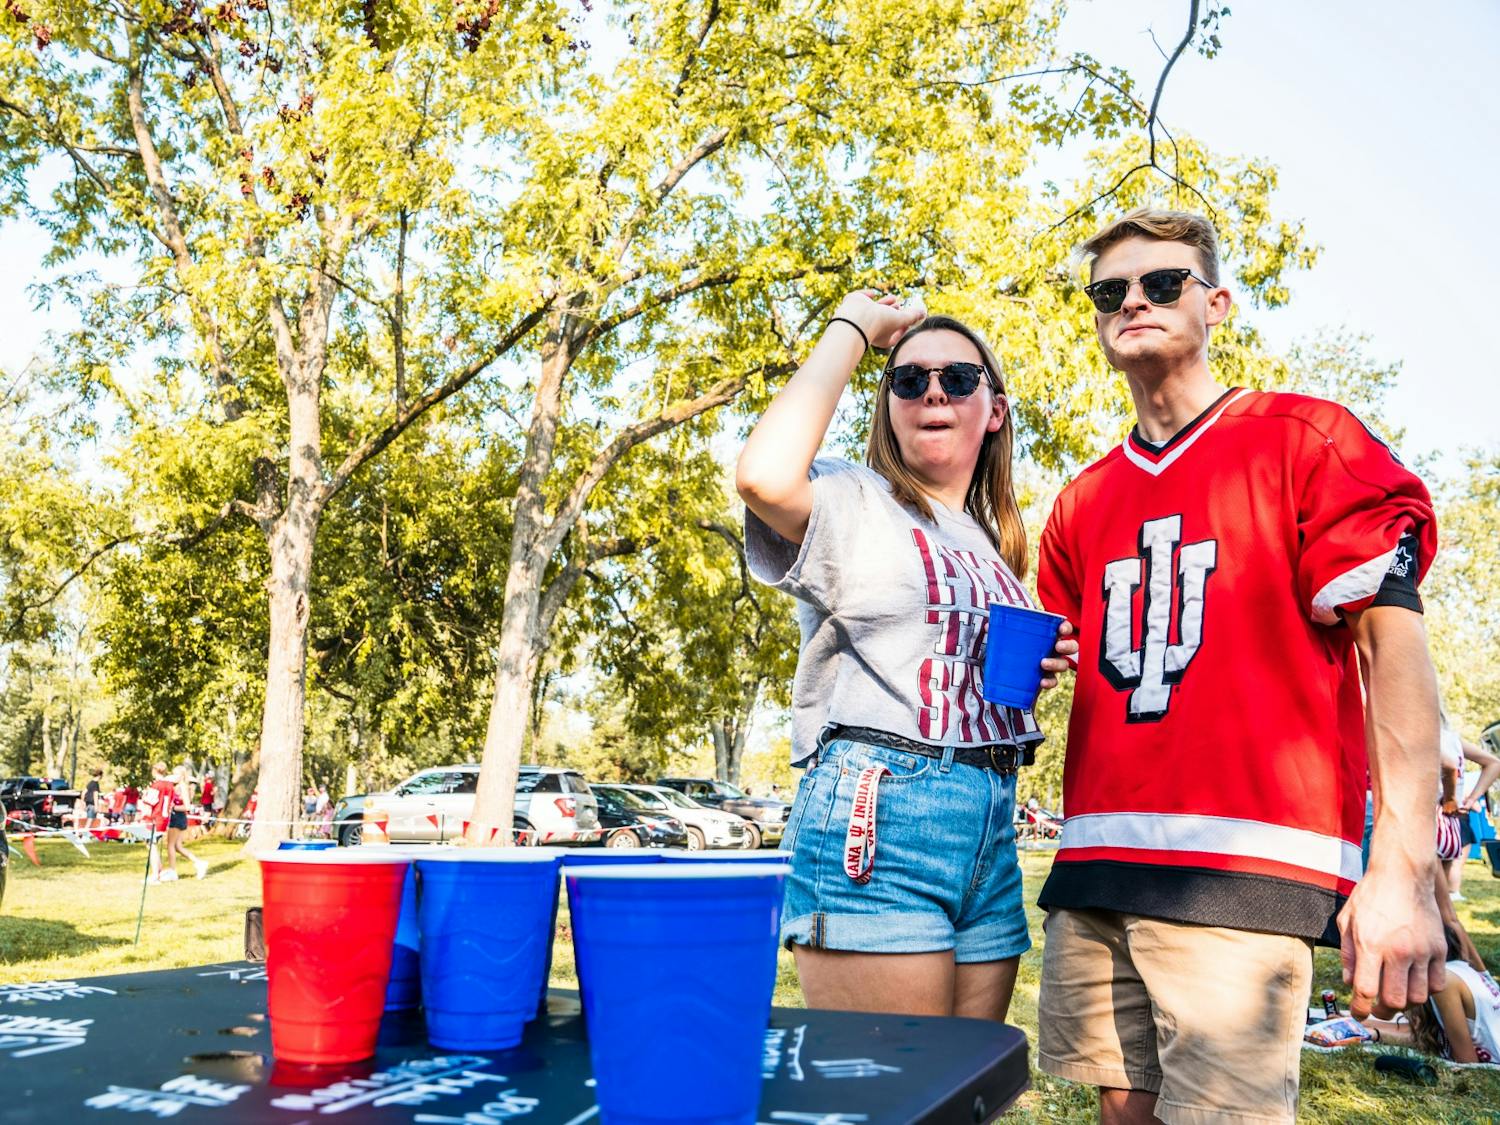 Gallery: Students tailgate before the Idaho game